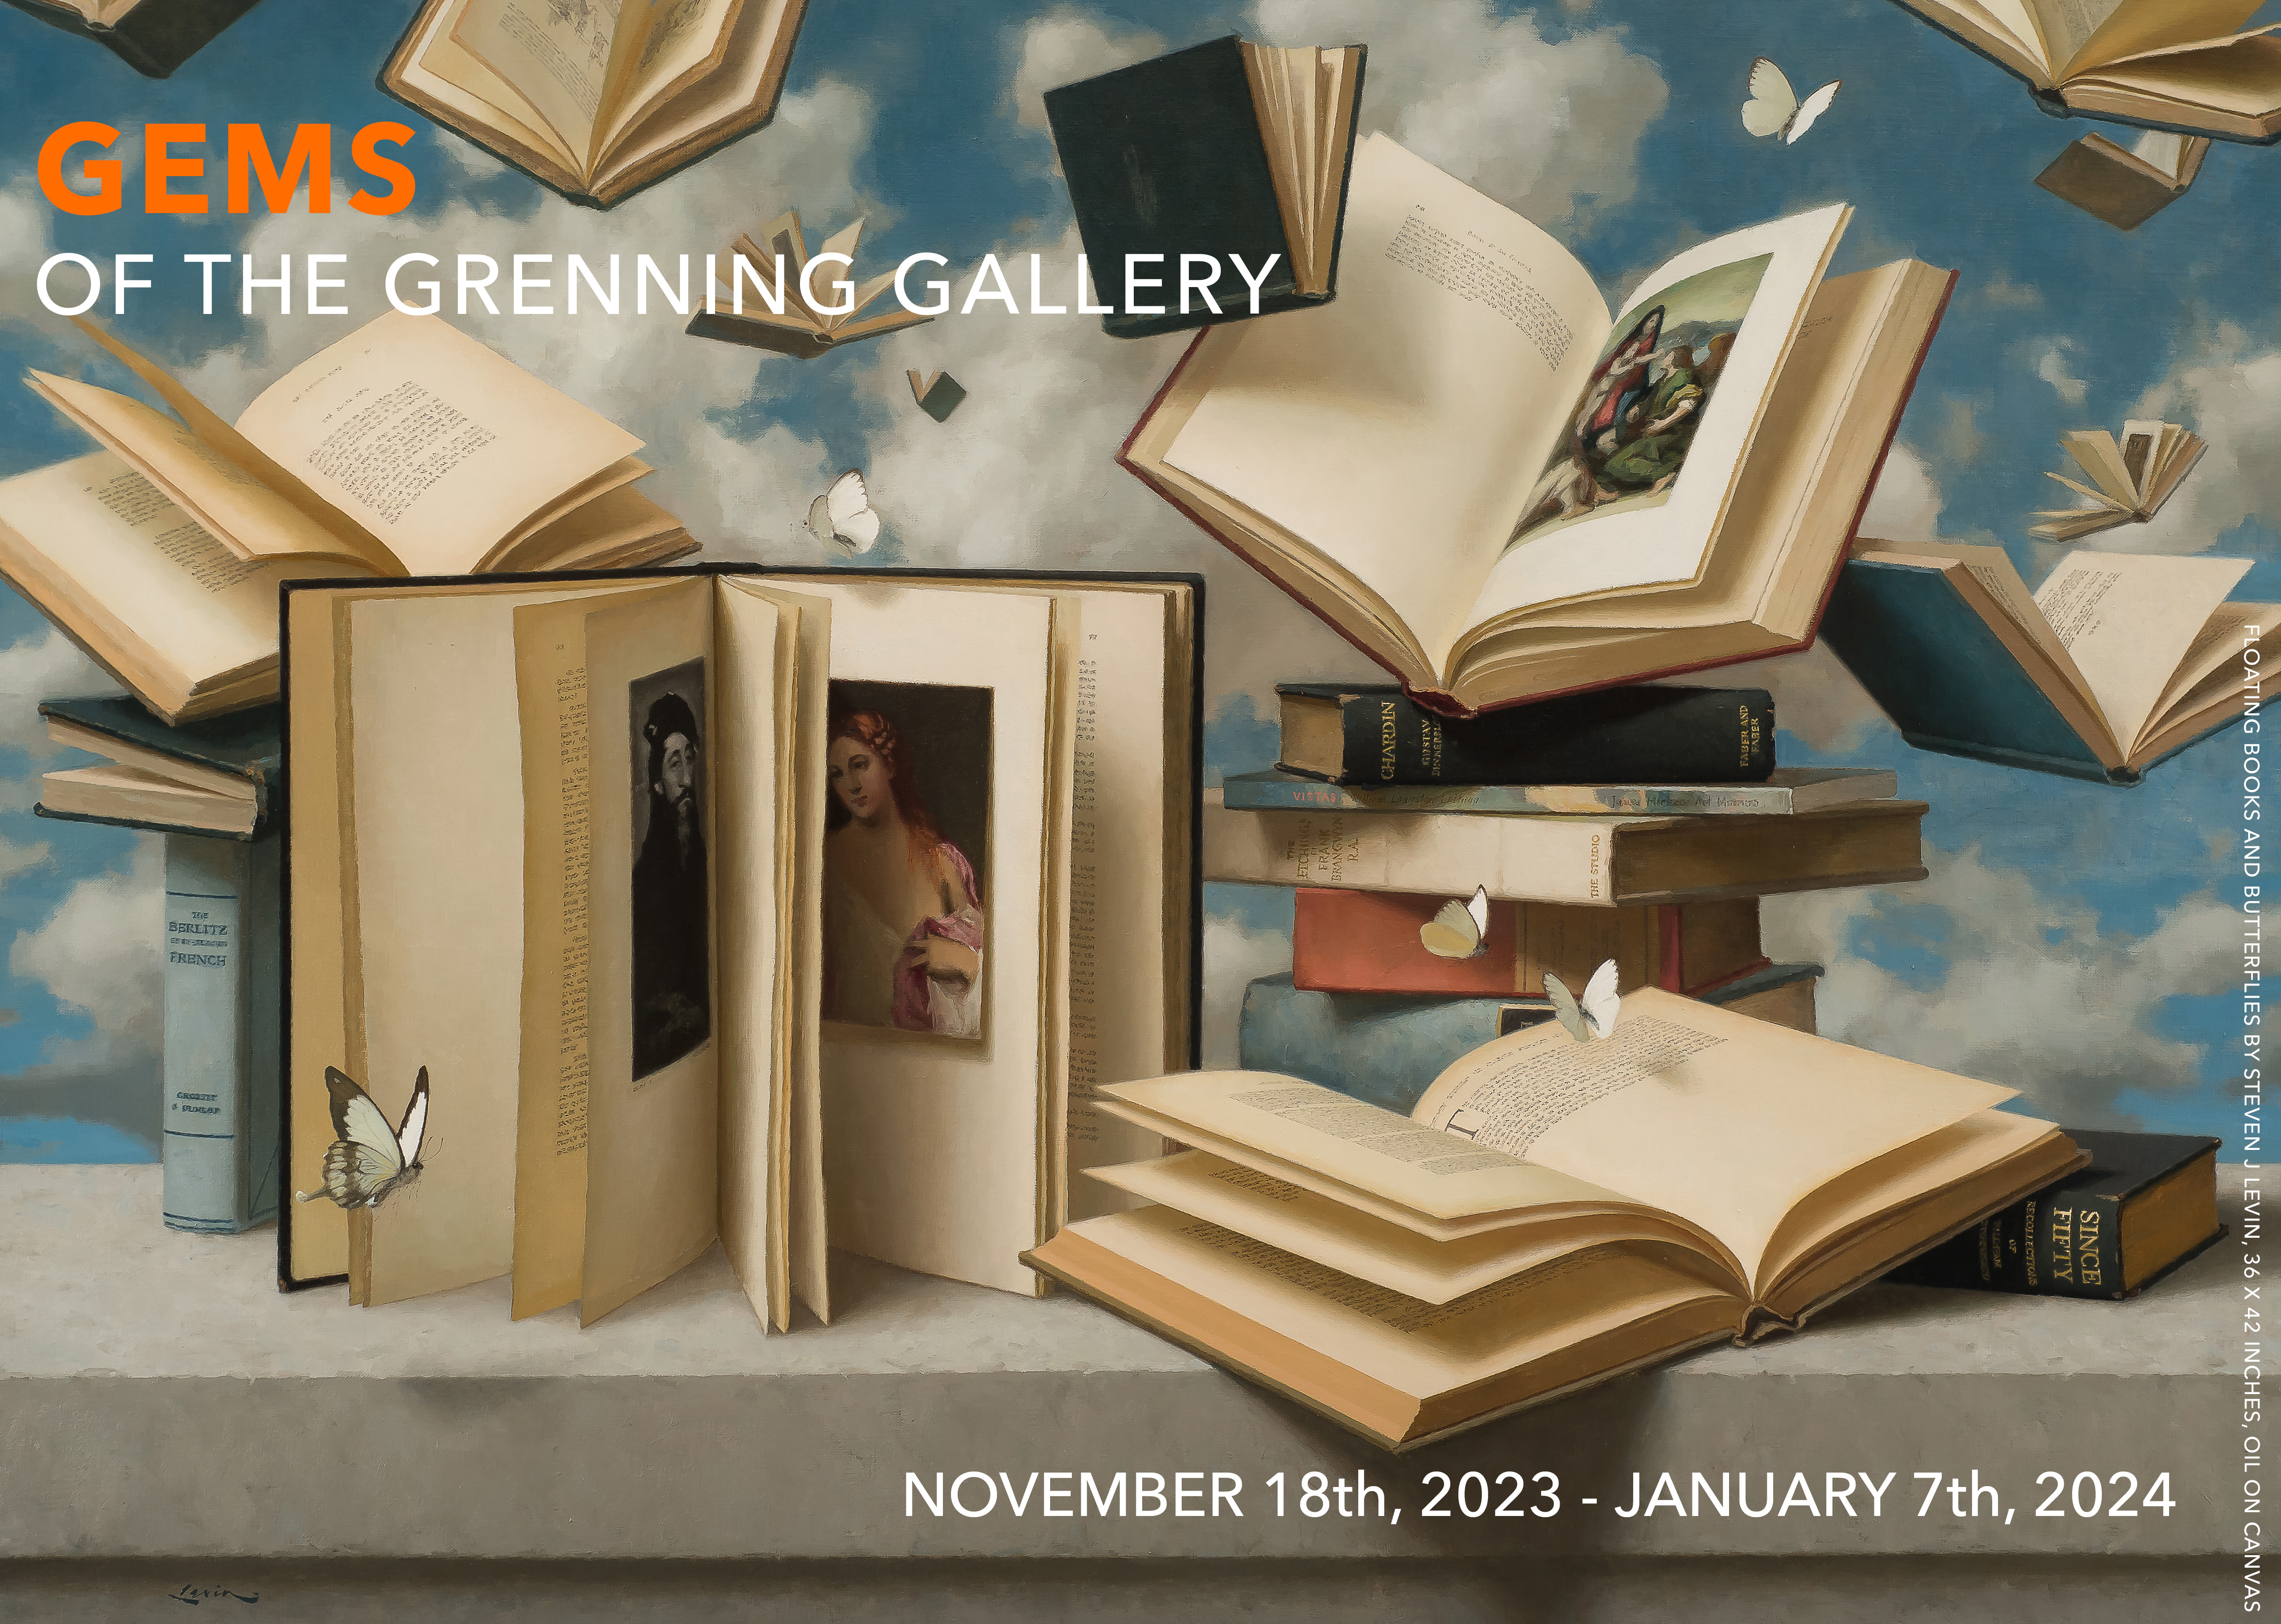 Gems of the Grenning Gallery Exhibition